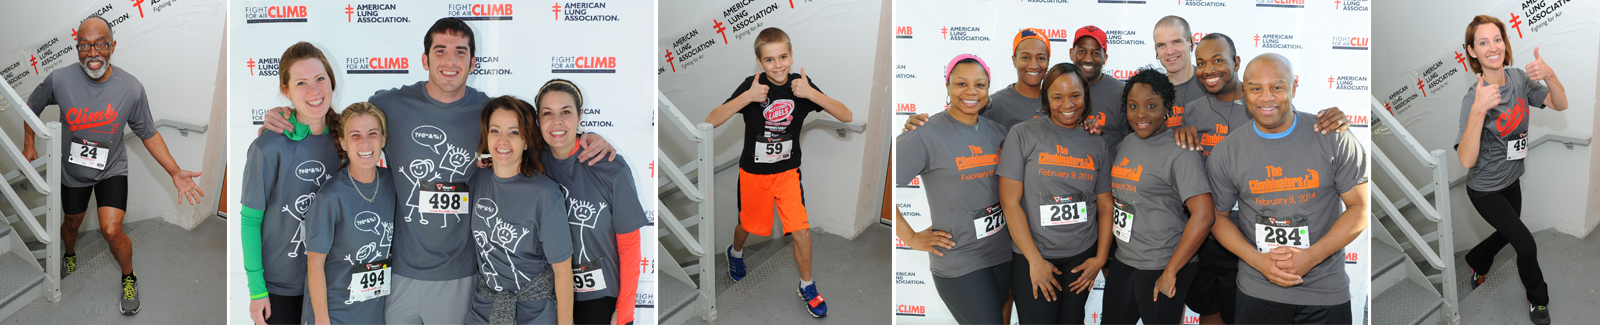 Fight For Air Climb - Oakbrook Terrace. Step Up to the Challenge!